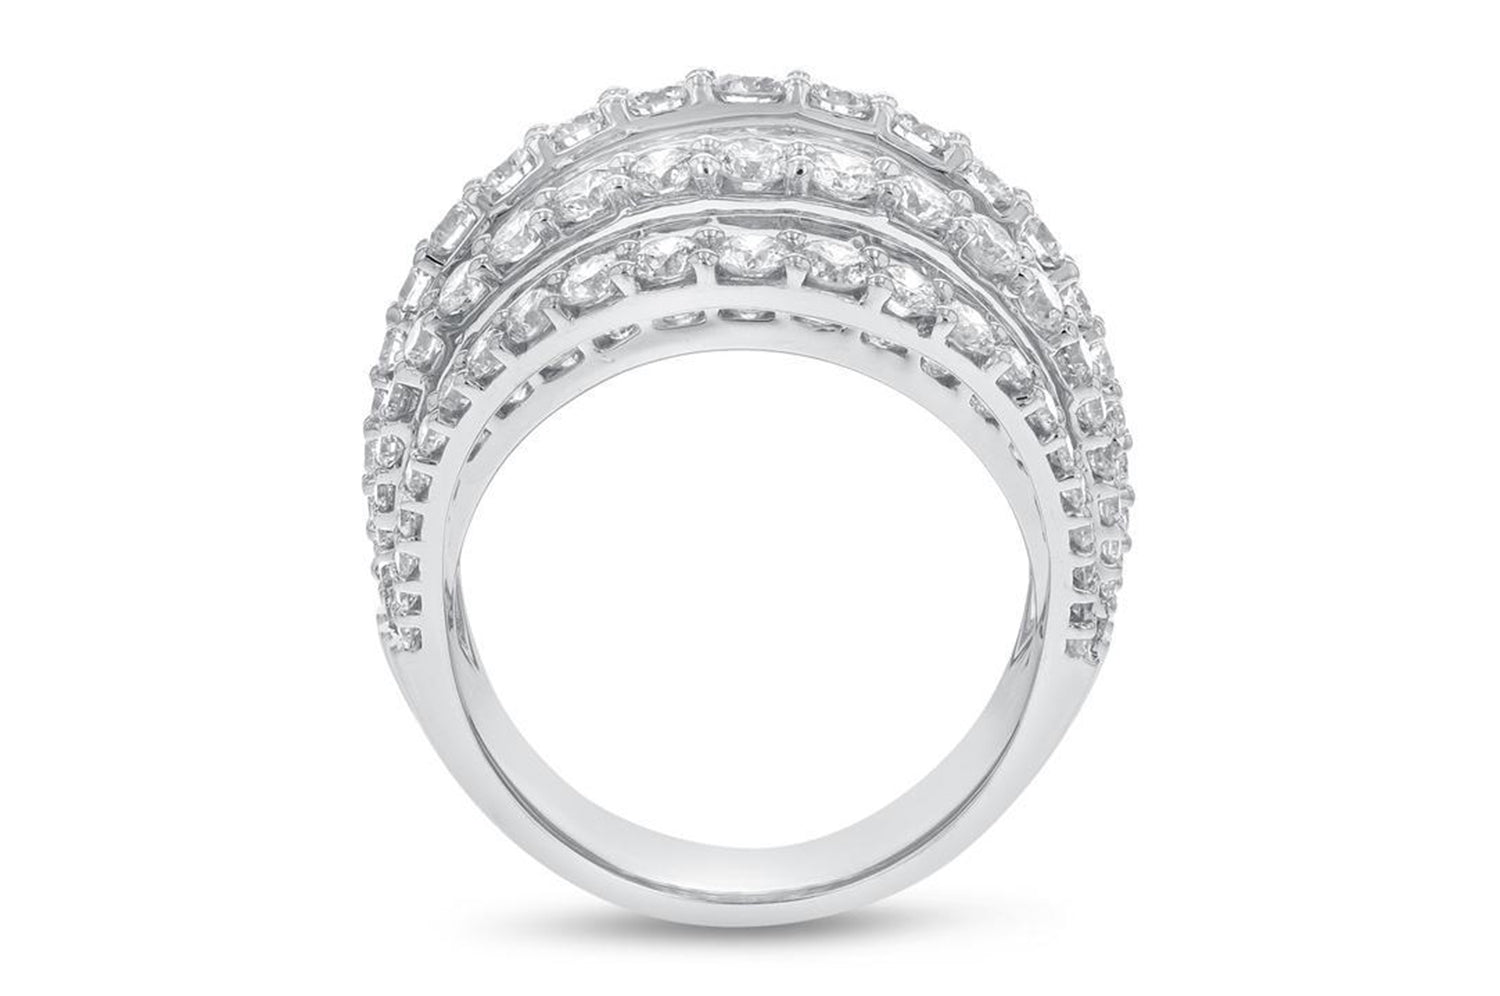 'Angelique' 18K White Gold Ring 4.80 Carats